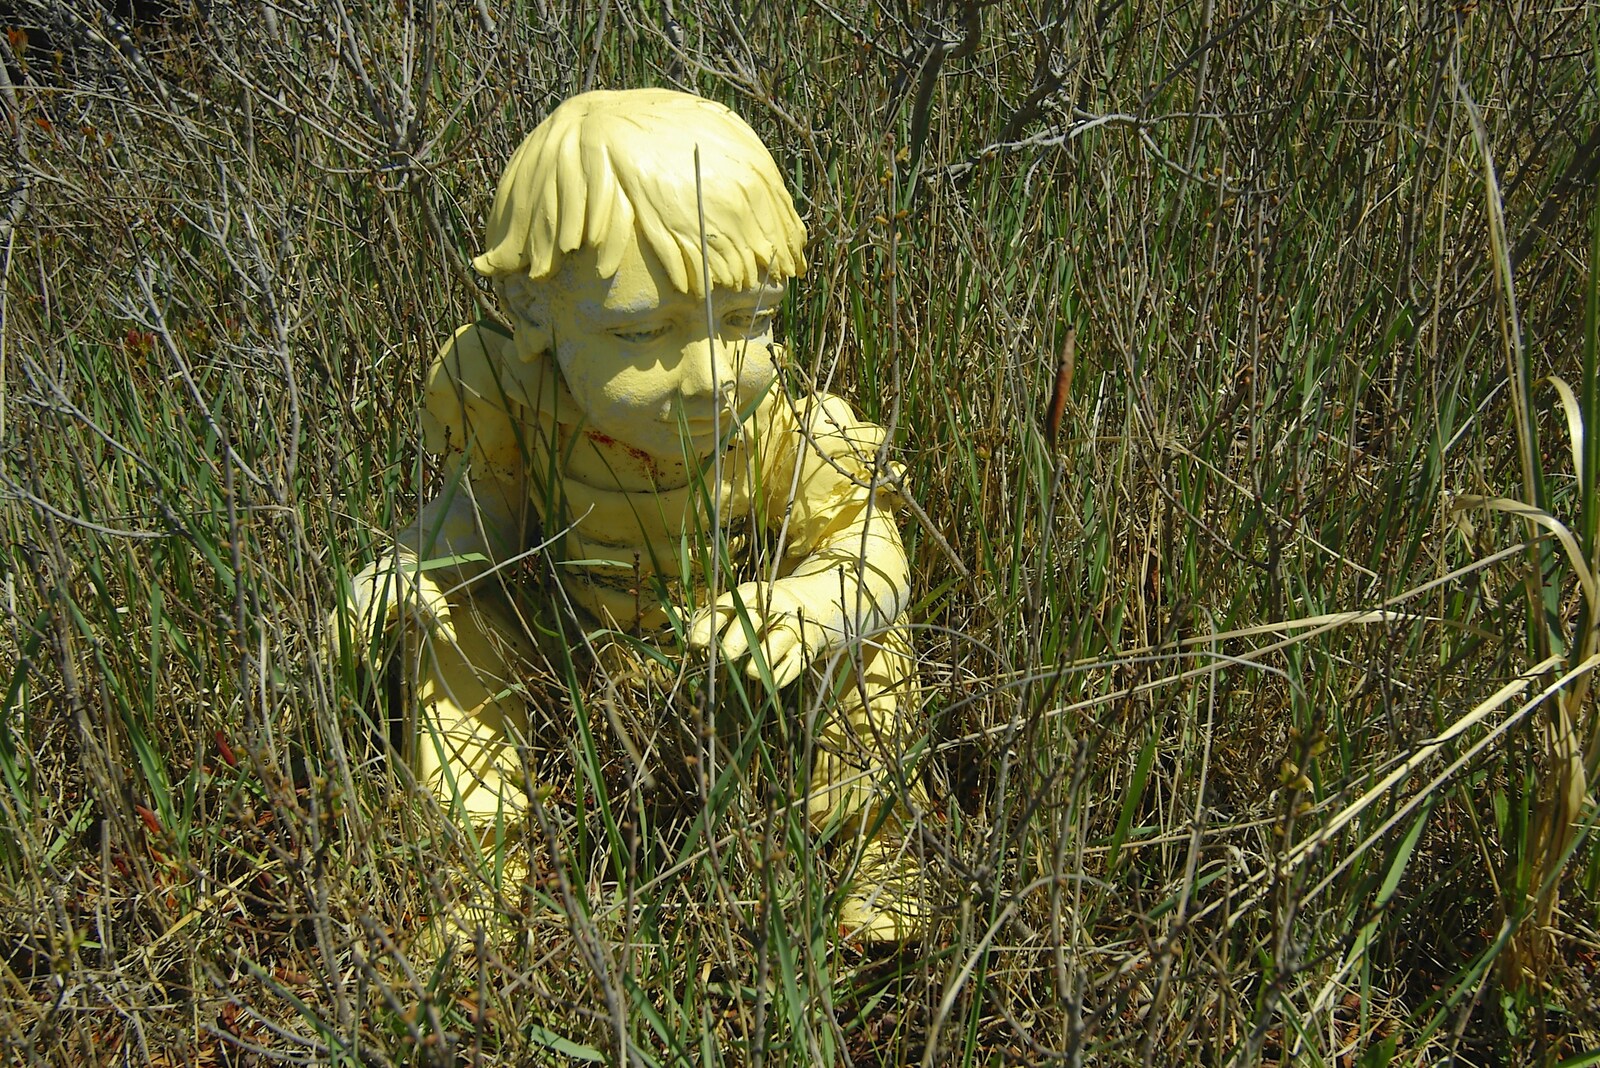 There's a weird yellow statue in the grass from Phil and the Fair Harbor Fire Engine, Fire Island, New York State, US - 30th April 2006